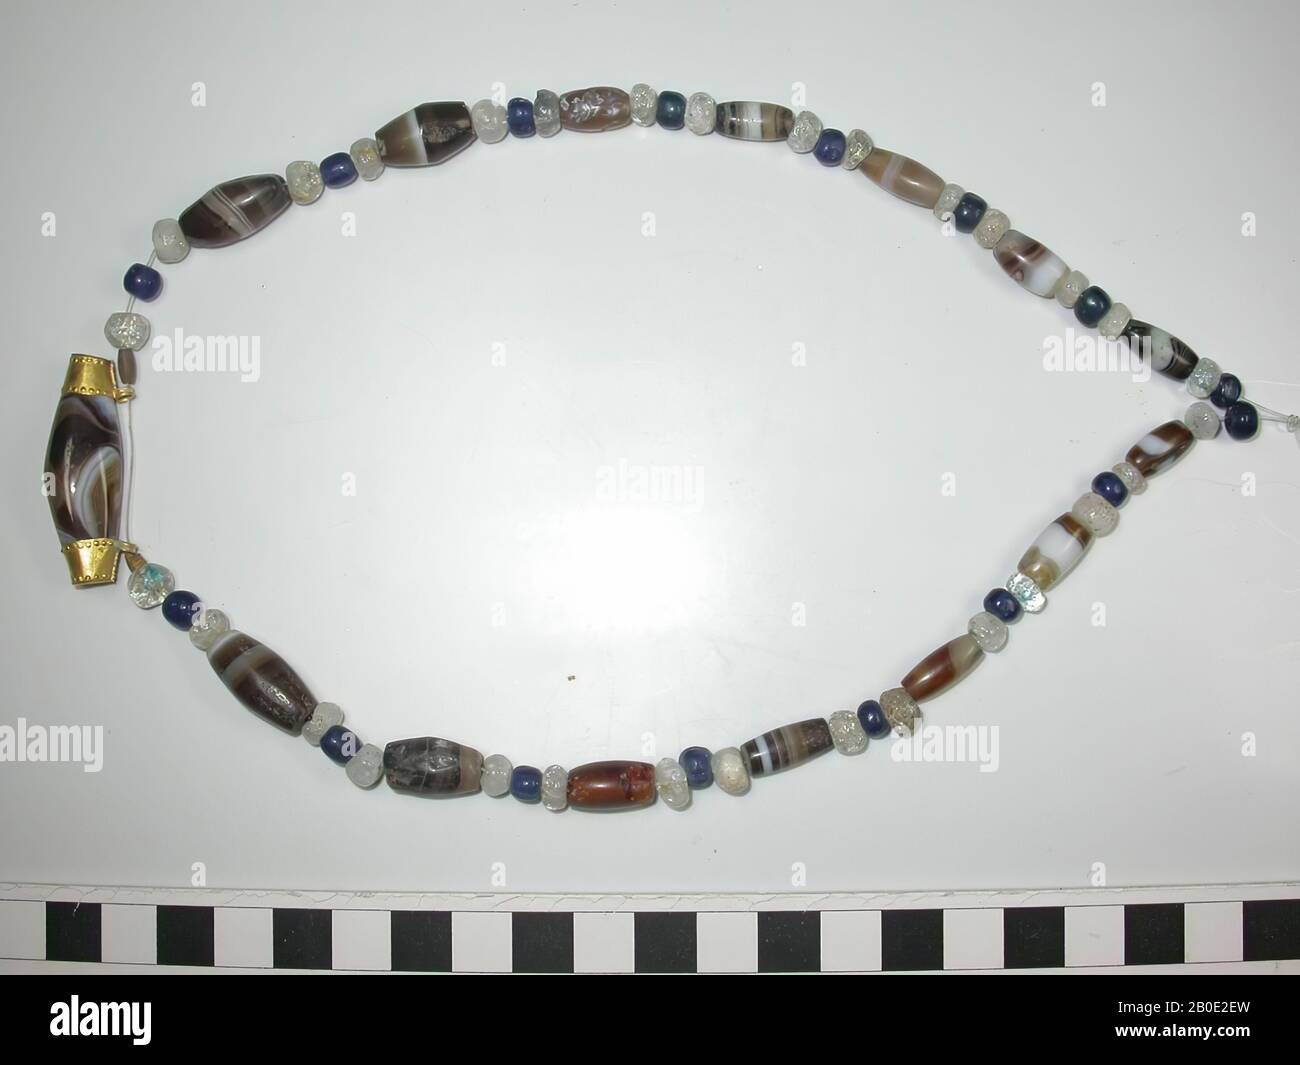 Necklace from round to flattened round and also long, cylindrical beads of stone, glass and gold. 16 small round beads of blue glass, 30 small round to flat beads of colorless to milky white glass or stone, 14 downwards cylindrical beads of brown and white sardonyx like layered stone, 2 small elongated beads of gold and finally at the center bottom one very long cylindrical bead of brown and white sardonyx-like layered stone, between two golden rings with pearls and rosettes and eyes. All beads are almost perfectly preserved. Well strung on modern cord. Total: 63 beads, ornament, metal, gold Stock Photo